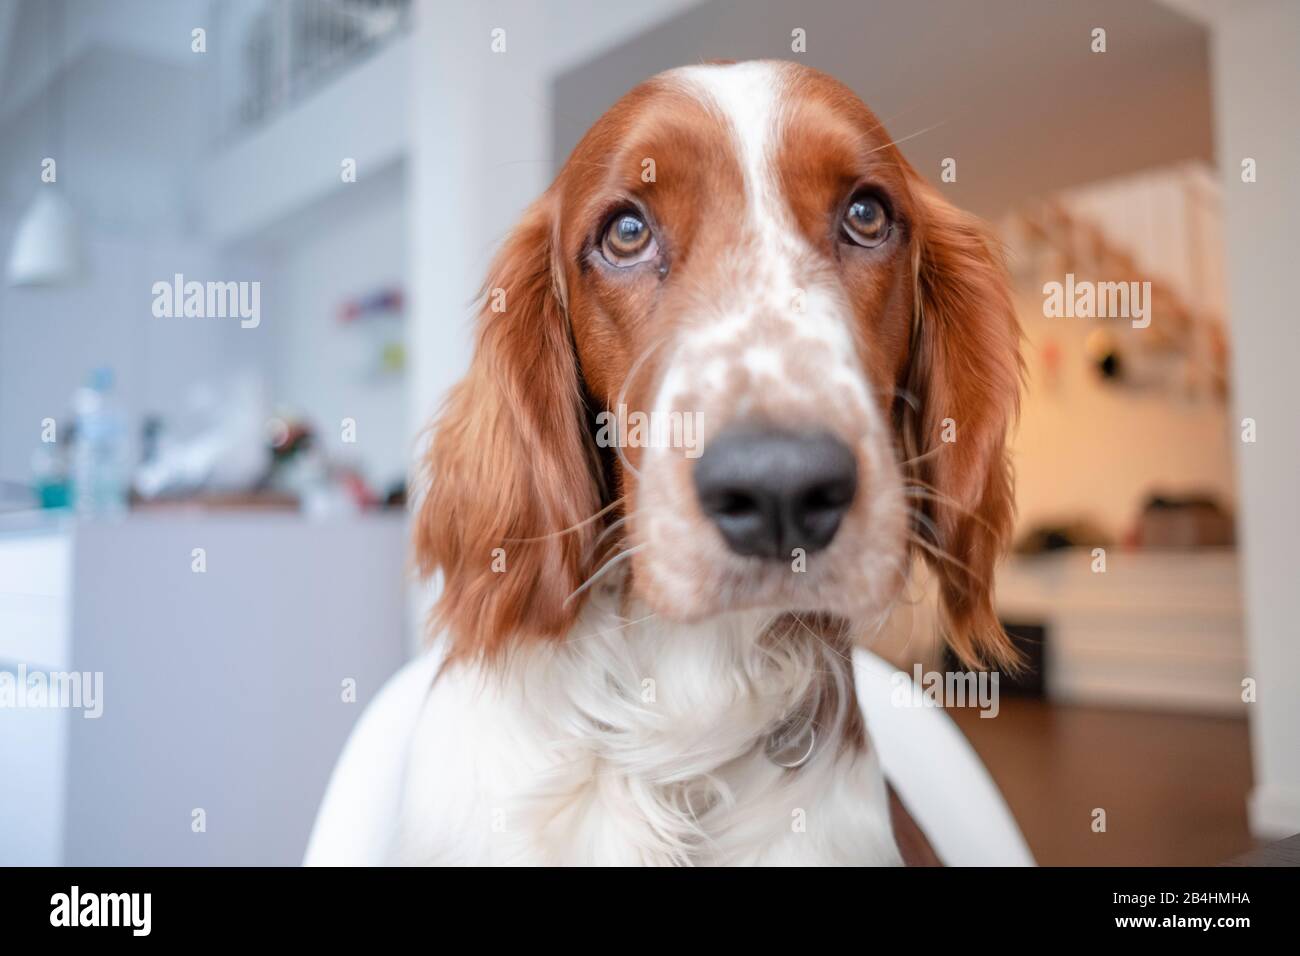 Dog, Irish red and white setter looks at the camera with dog's eyes Stock Photo